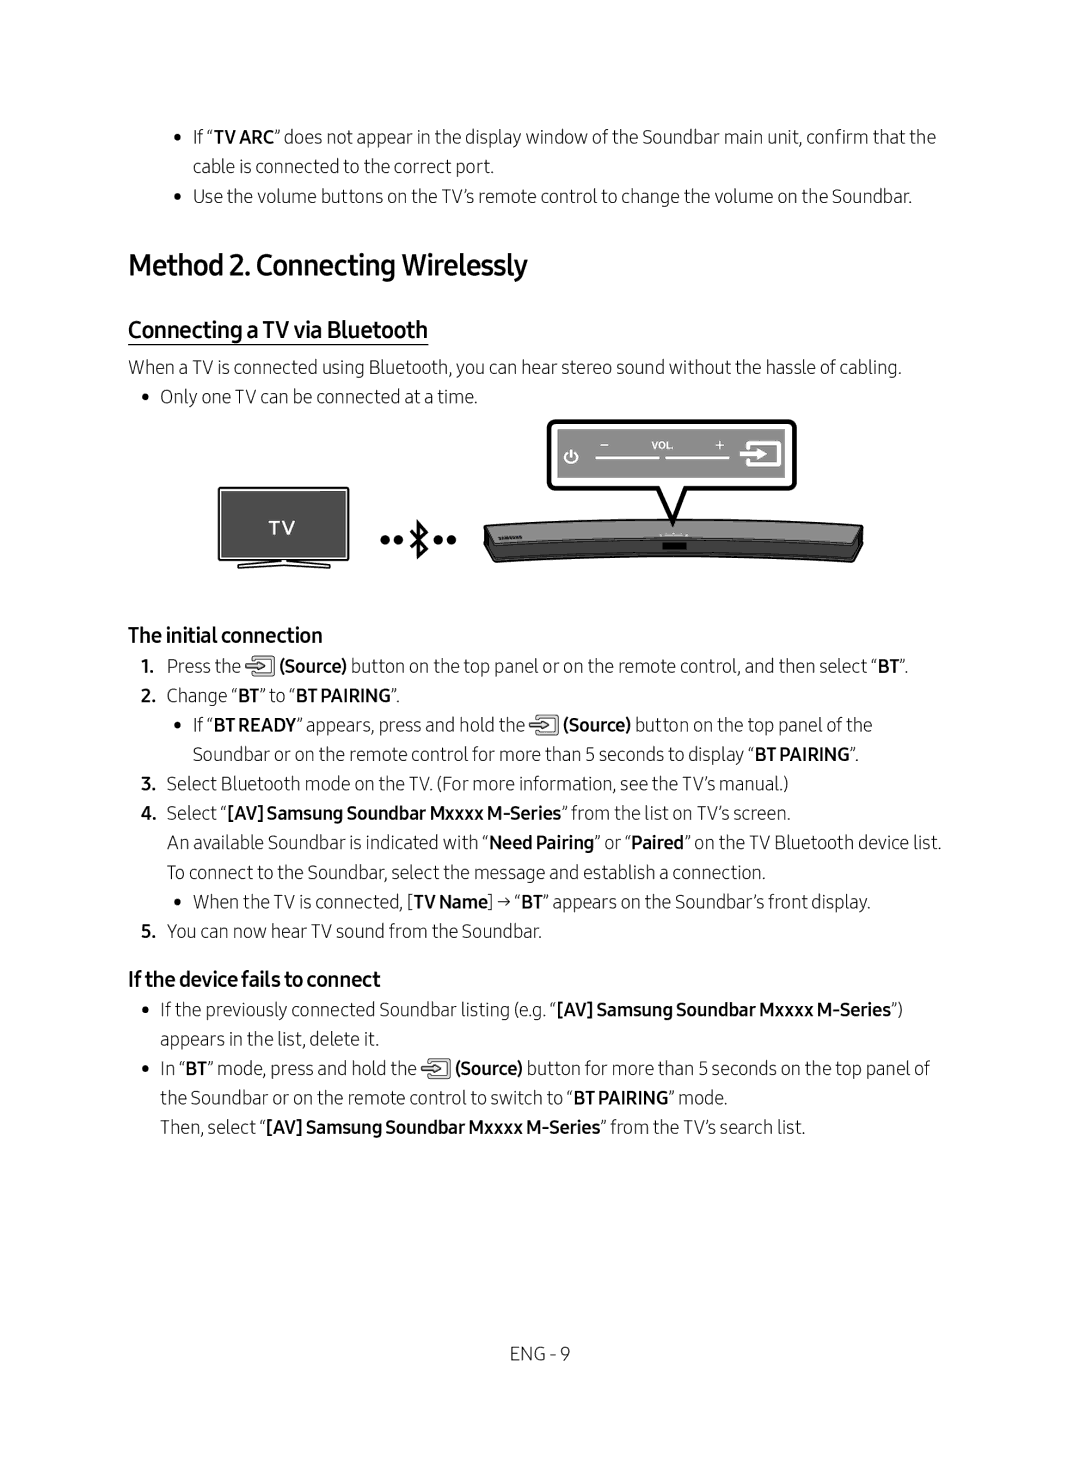 Samsung HW-M4500/EN manual Method 2. Connecting Wirelessly, Connecting a TV via Bluetooth, Initial connection 